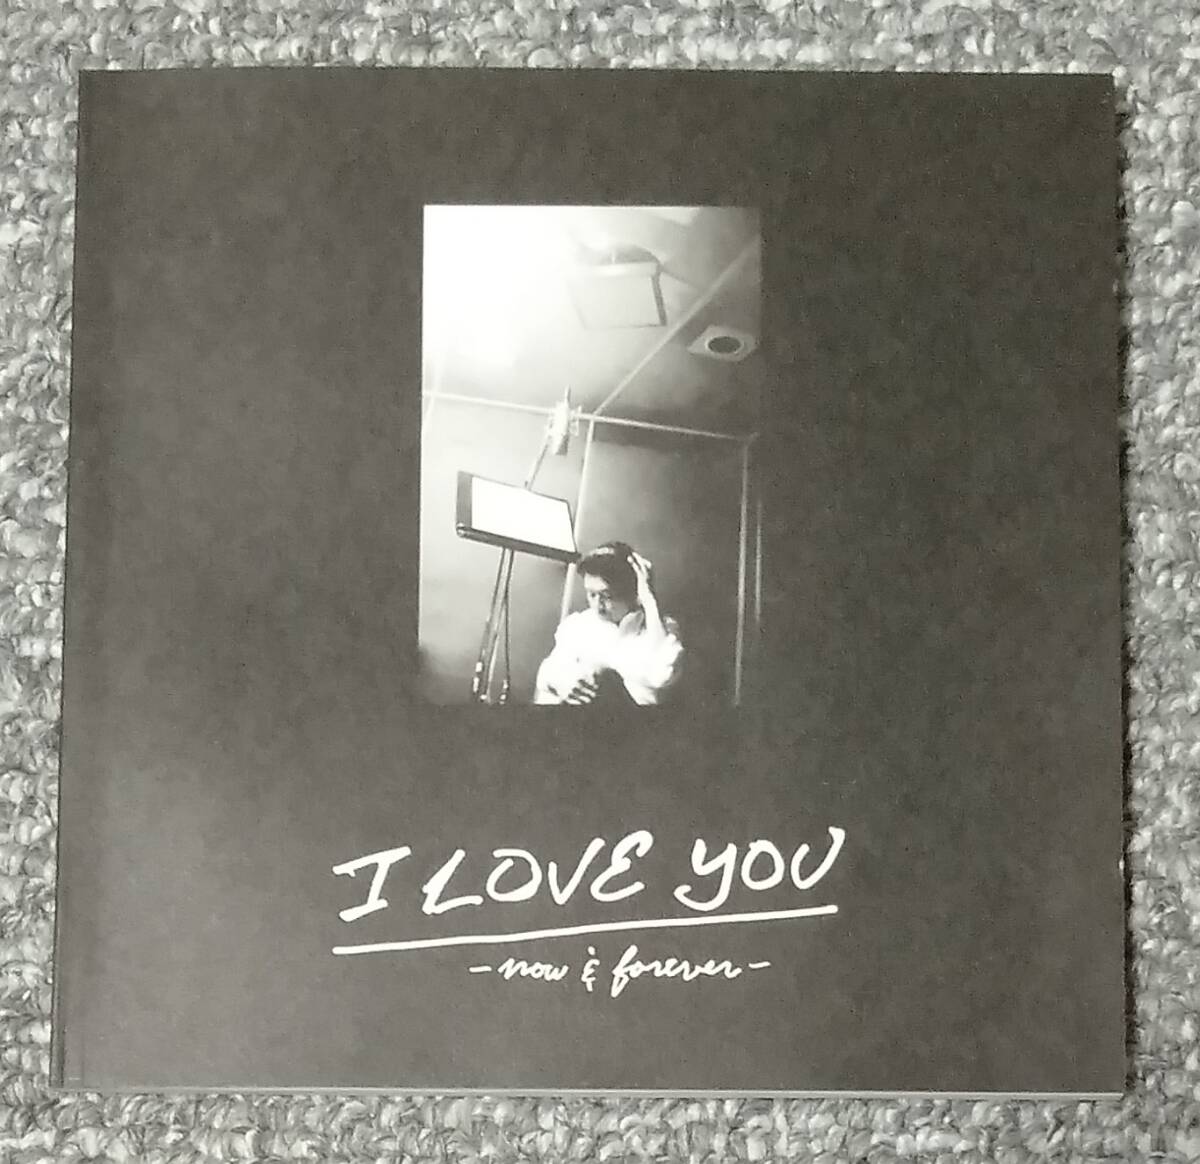 2CDベスト 桑田佳祐 「I LOVE YOU -now & forever」 （検・サザンオールスターズ）の画像5